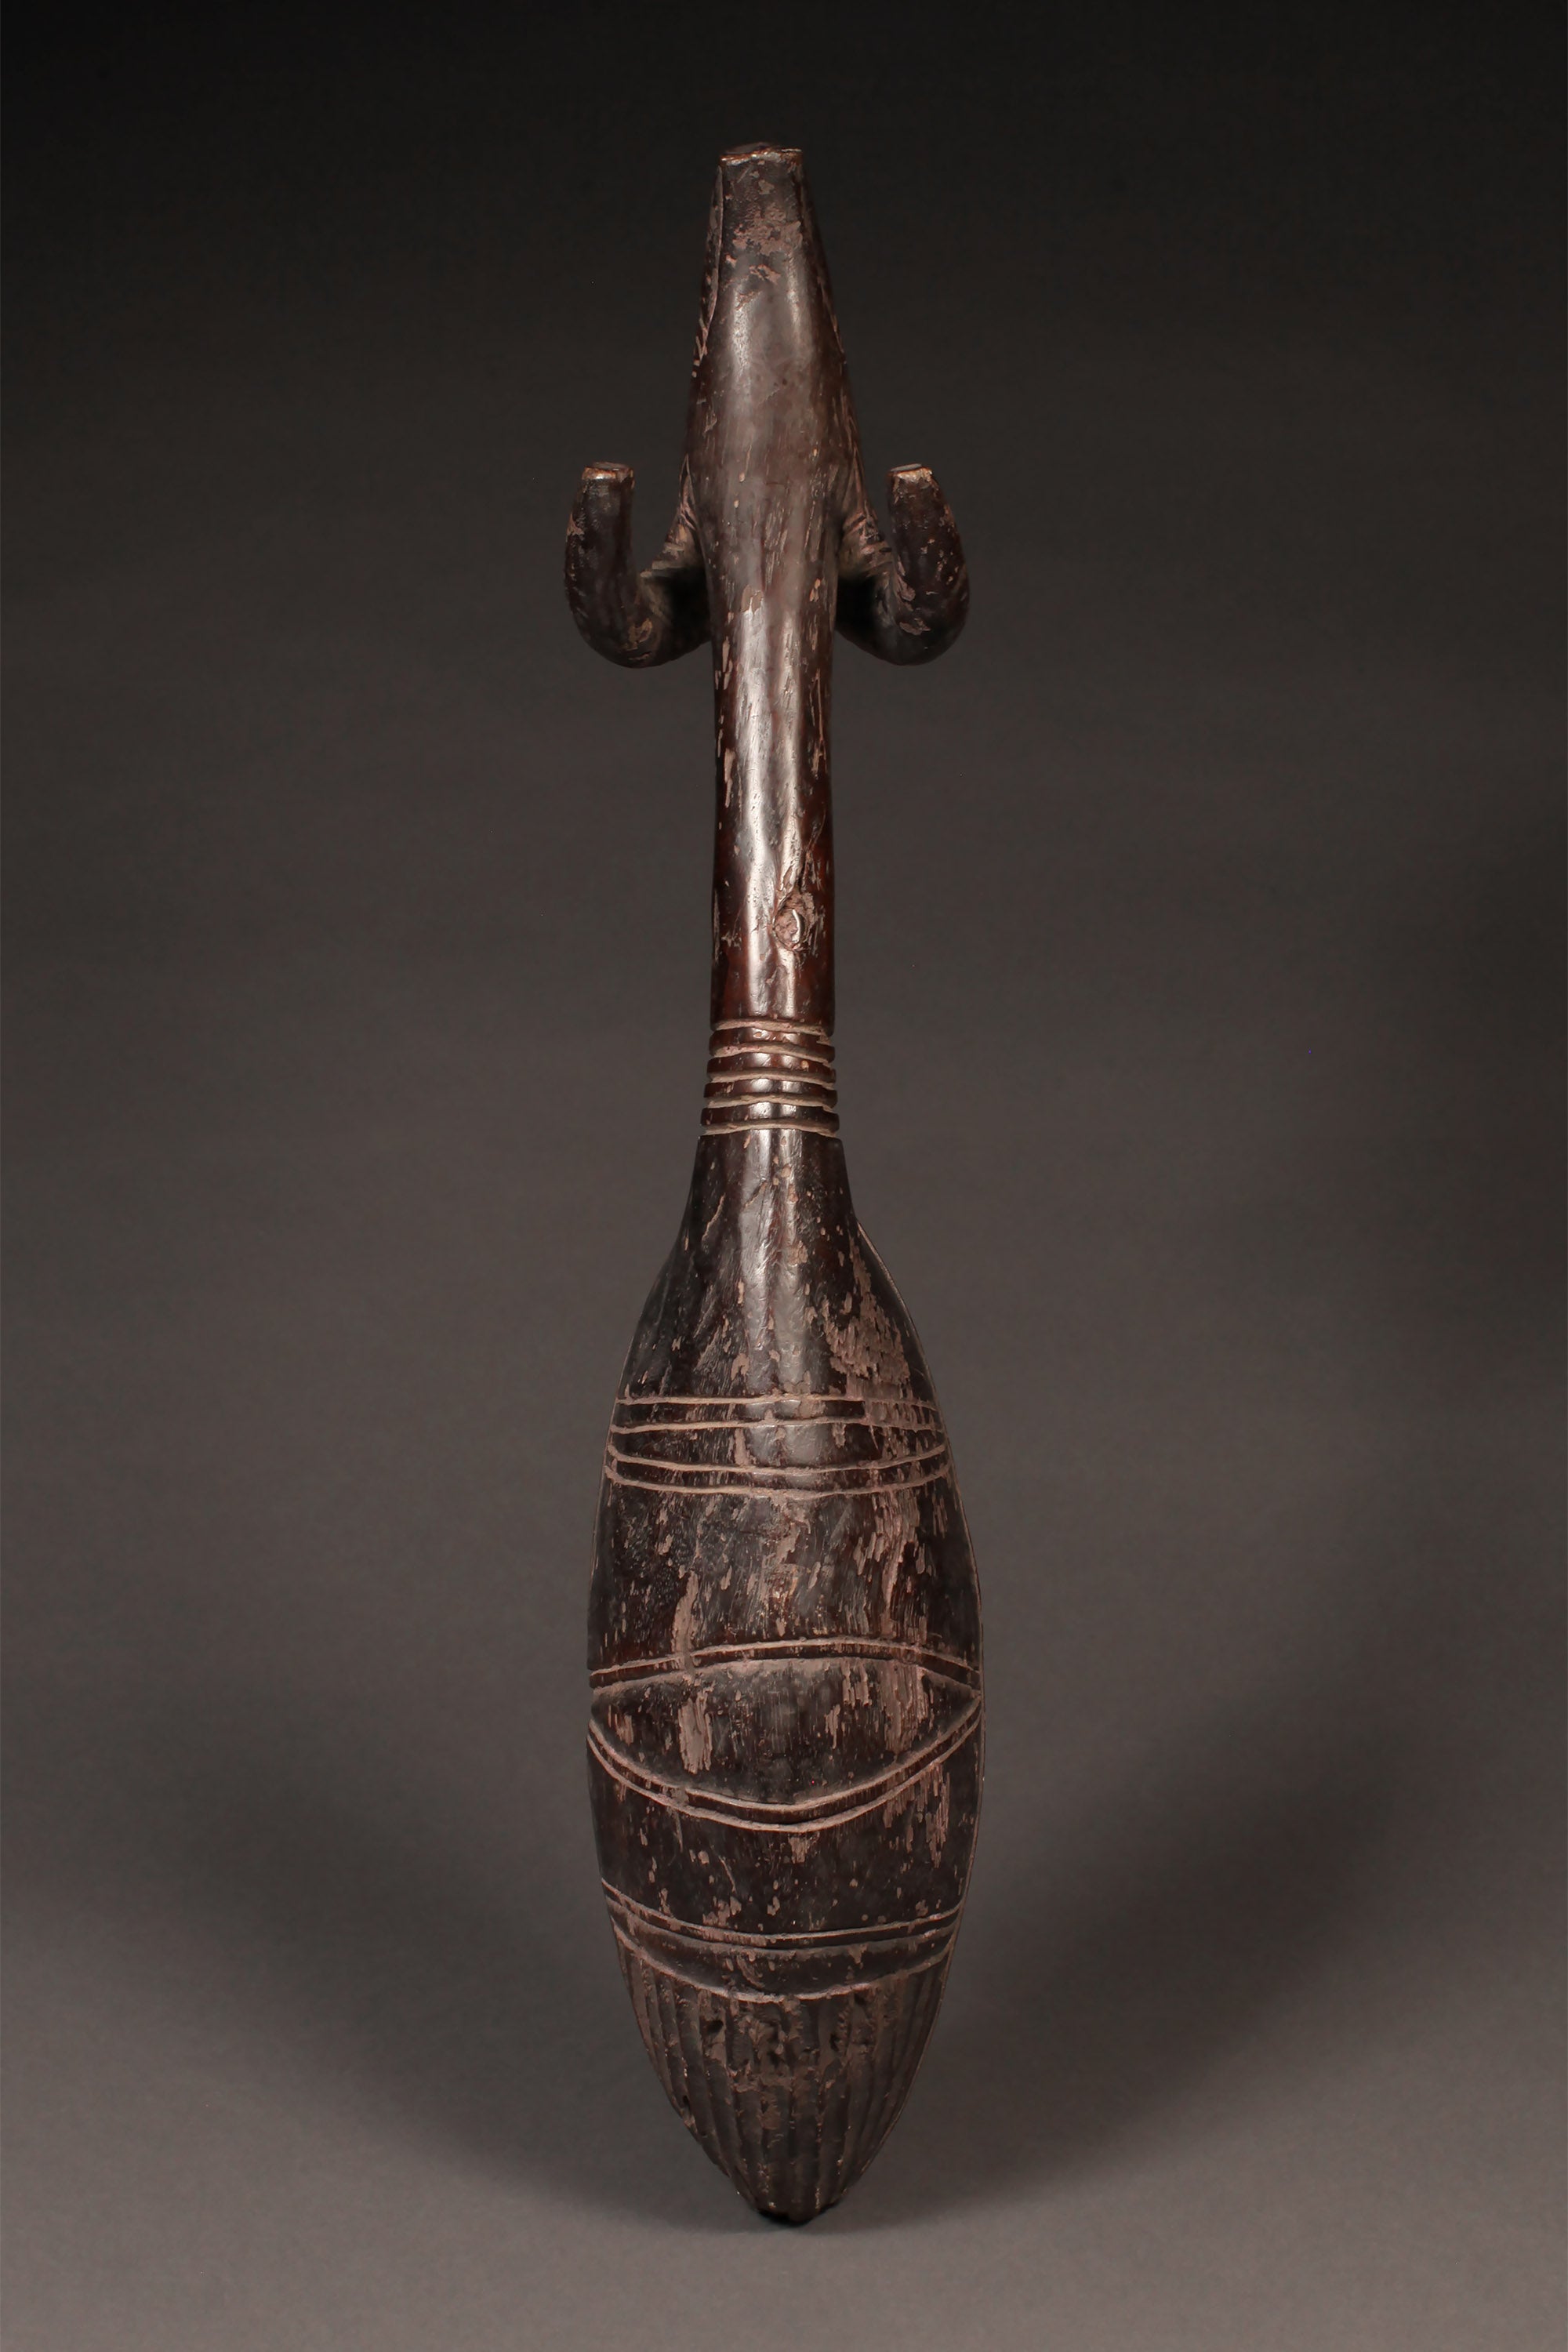 Tribal Objects - African Tribal Art - Ancient Ceremonial Art - Handcrafted Artifacts - Masks - Wood Sculptures - Iron Bronze Objects - Textiles - Art Pieces - African Folk Art - This rare and authentic Ceremonial Ladle Spoon from the Dan Tribe is carved from wood from the Ivory Coast and Liberia. It features a Ram's Head on the handle and is estimated to be very old. A true collector's item, perfect for those looking for an extraordinary cultural piece. 30